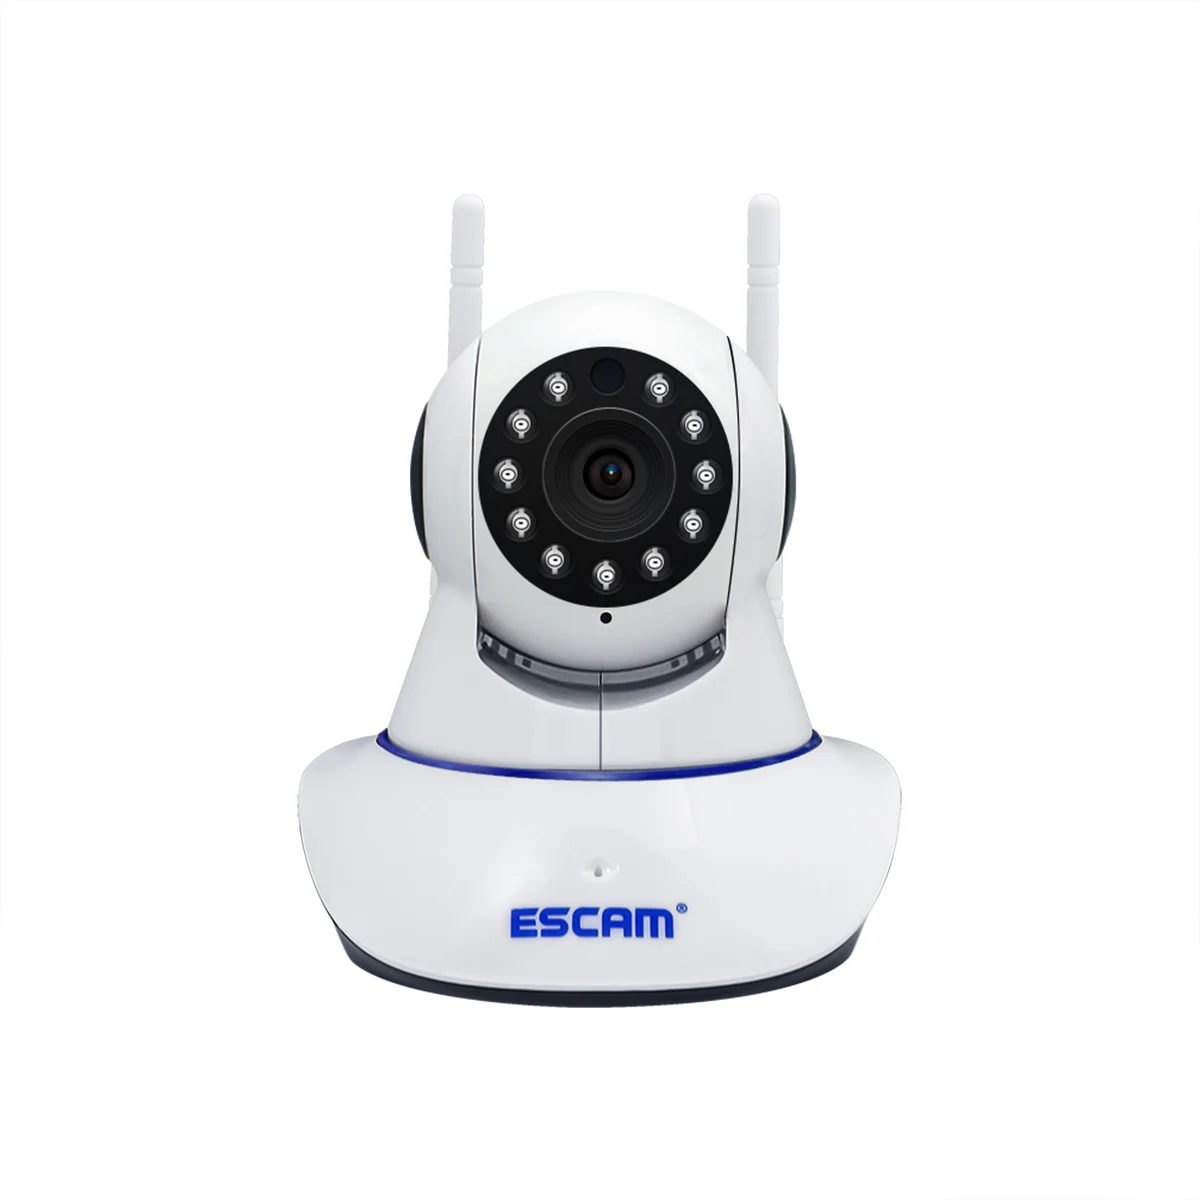 

ESCAM G01 WiFi IP IR Camera Dual Antenna 1080P Pan/Tilt Support Two Way Audio ONVIF Max Up to 128GB Security Wireless Camera